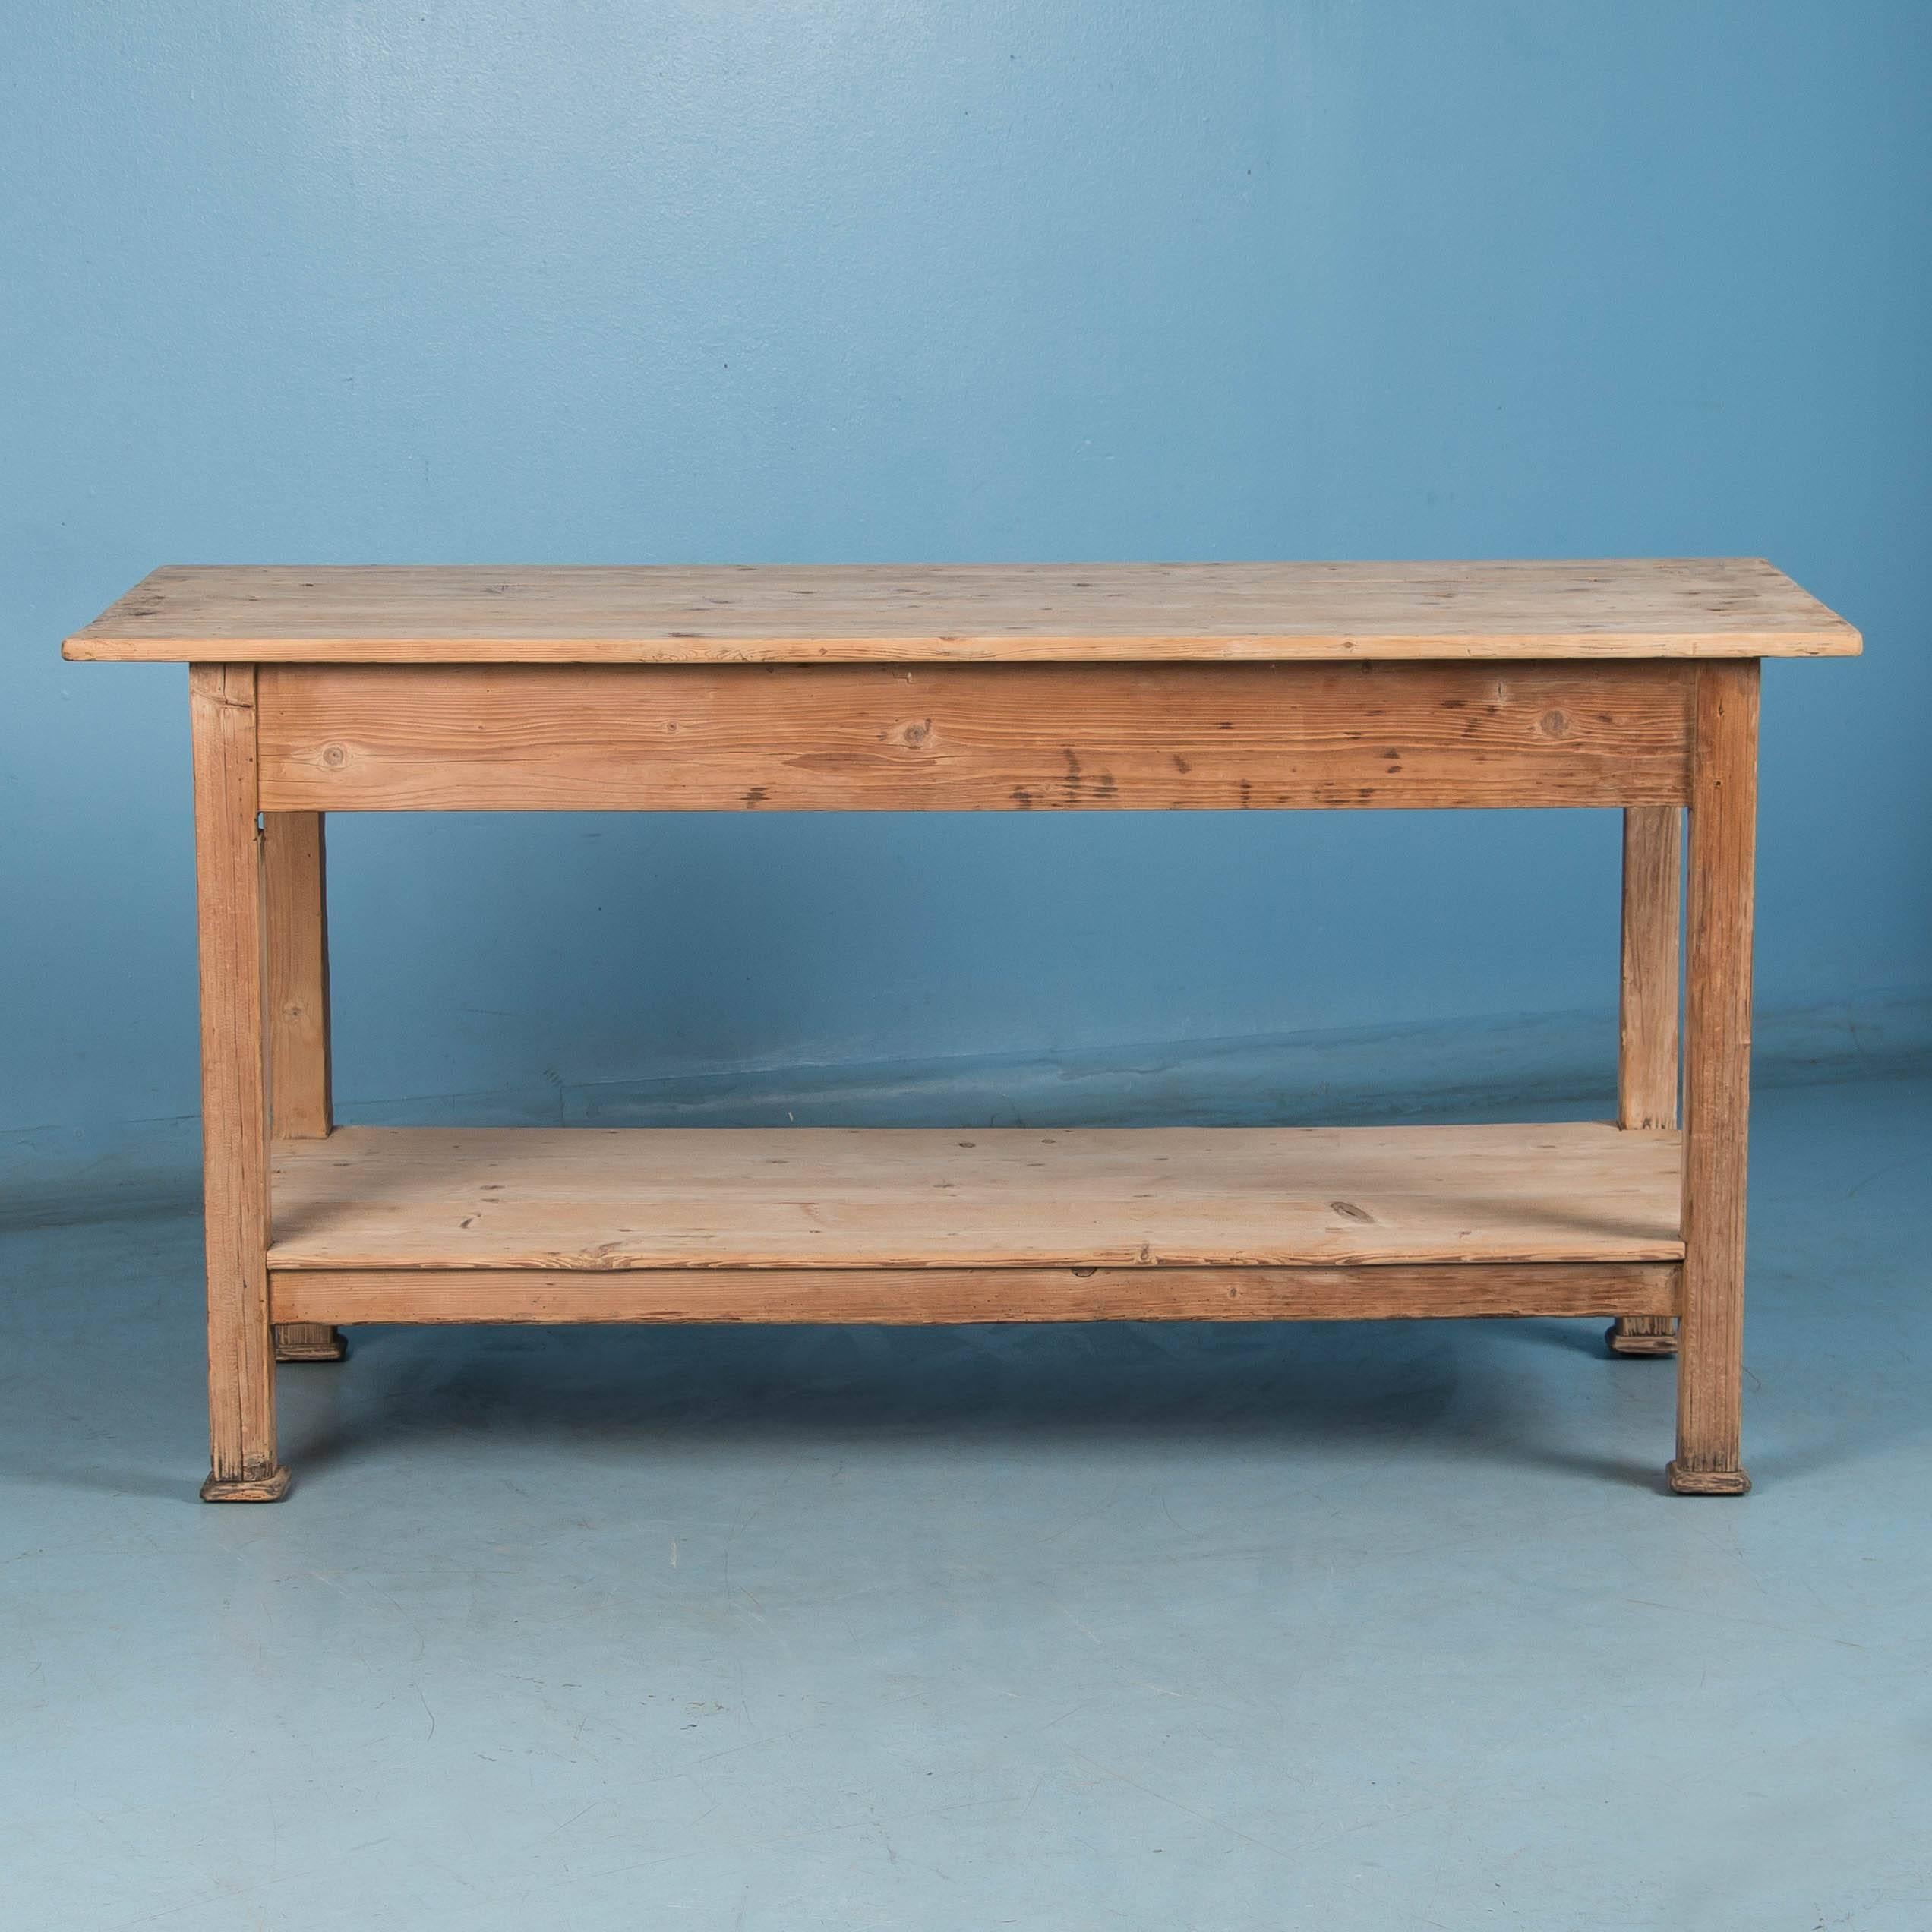 This rustic country pine table with a large work surface and a full lower shelf, would make a great kitchen island. The stripped pine has been left natural, giving this work table a more rustic or country feel, however a painted or wax finish could